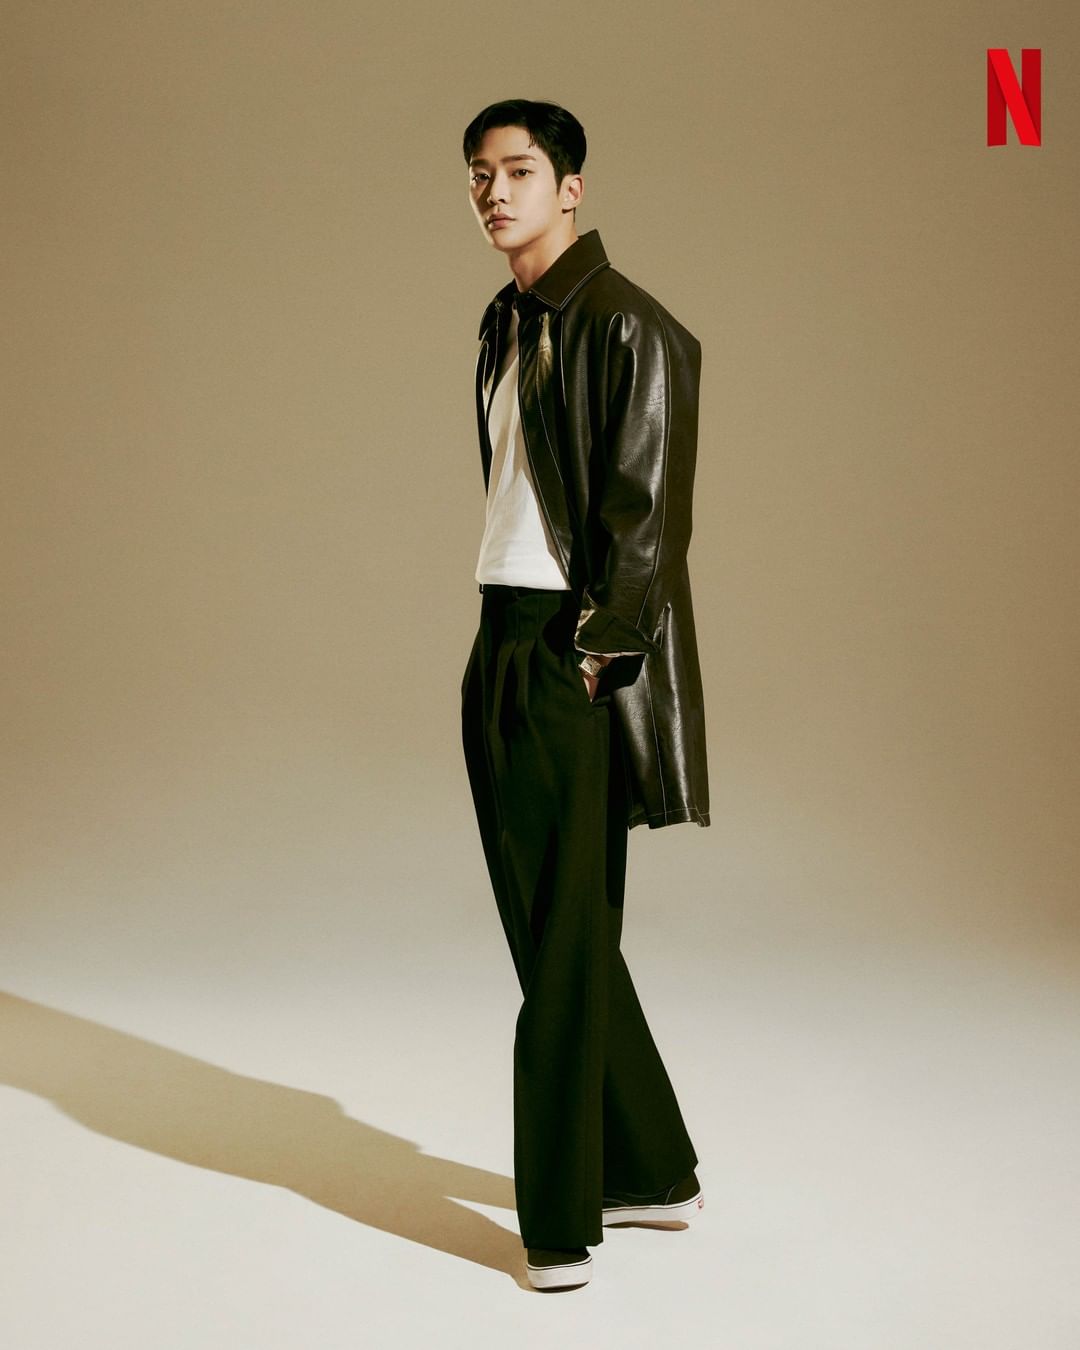 Rowoon cao 1m9